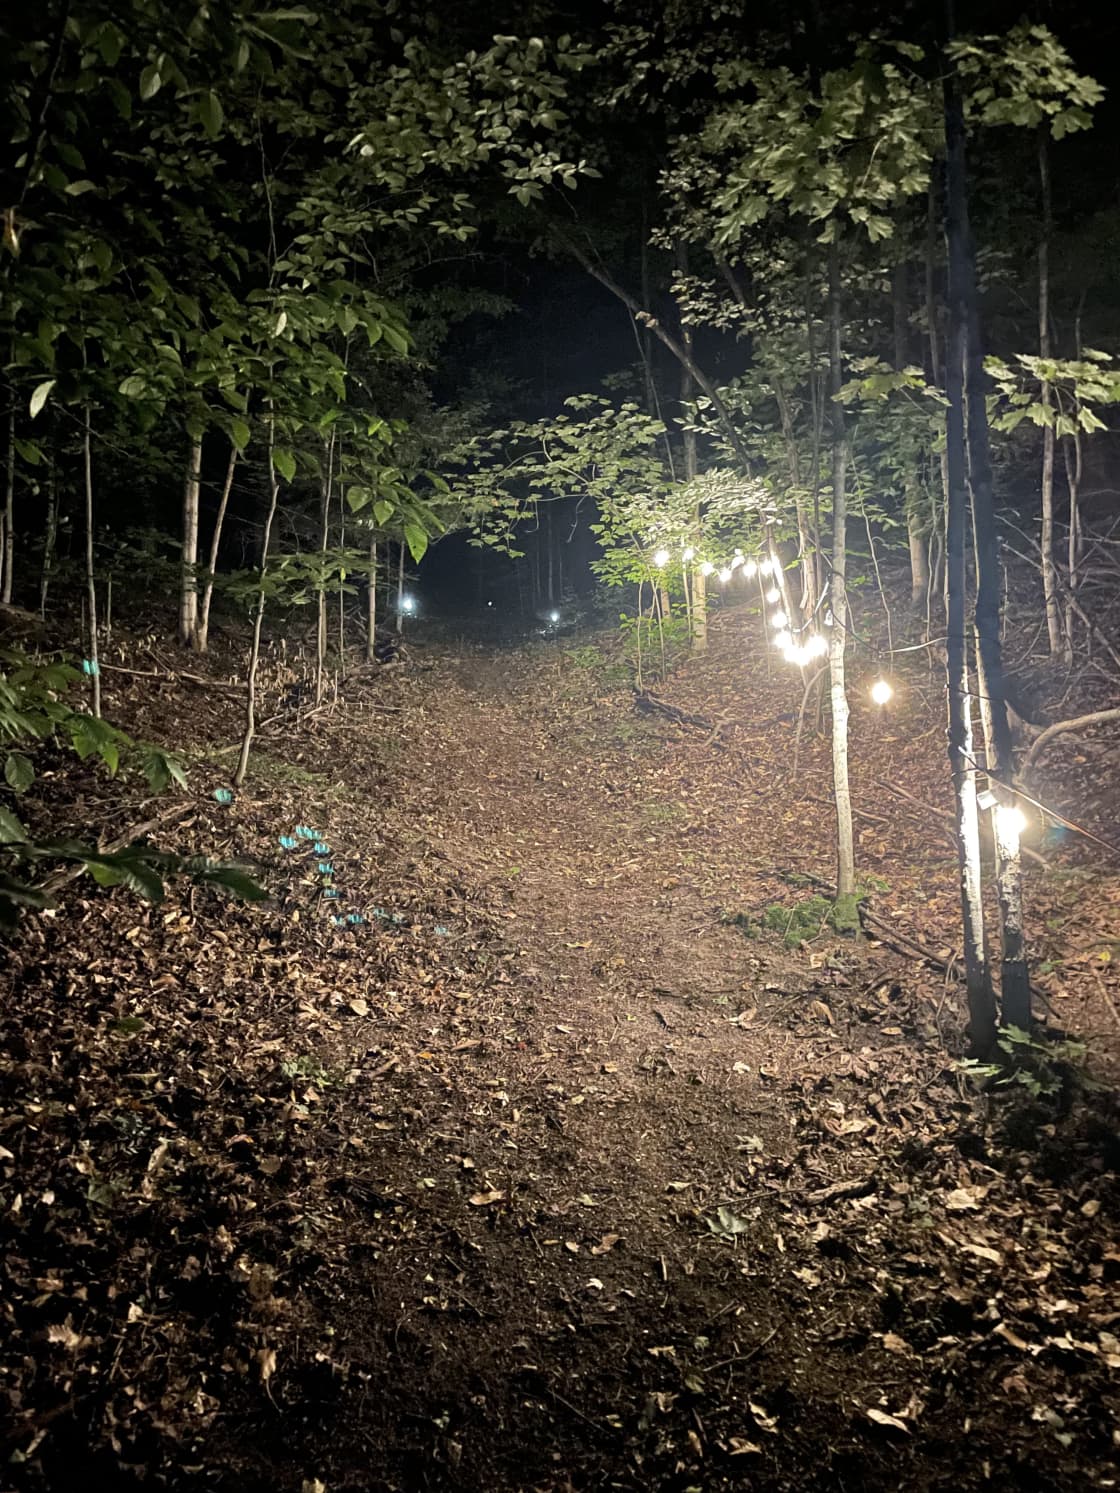 One of two trails leading to the campsite. This one, which is the best one to take to the compost toilet, will be partially lit until we go to bed.